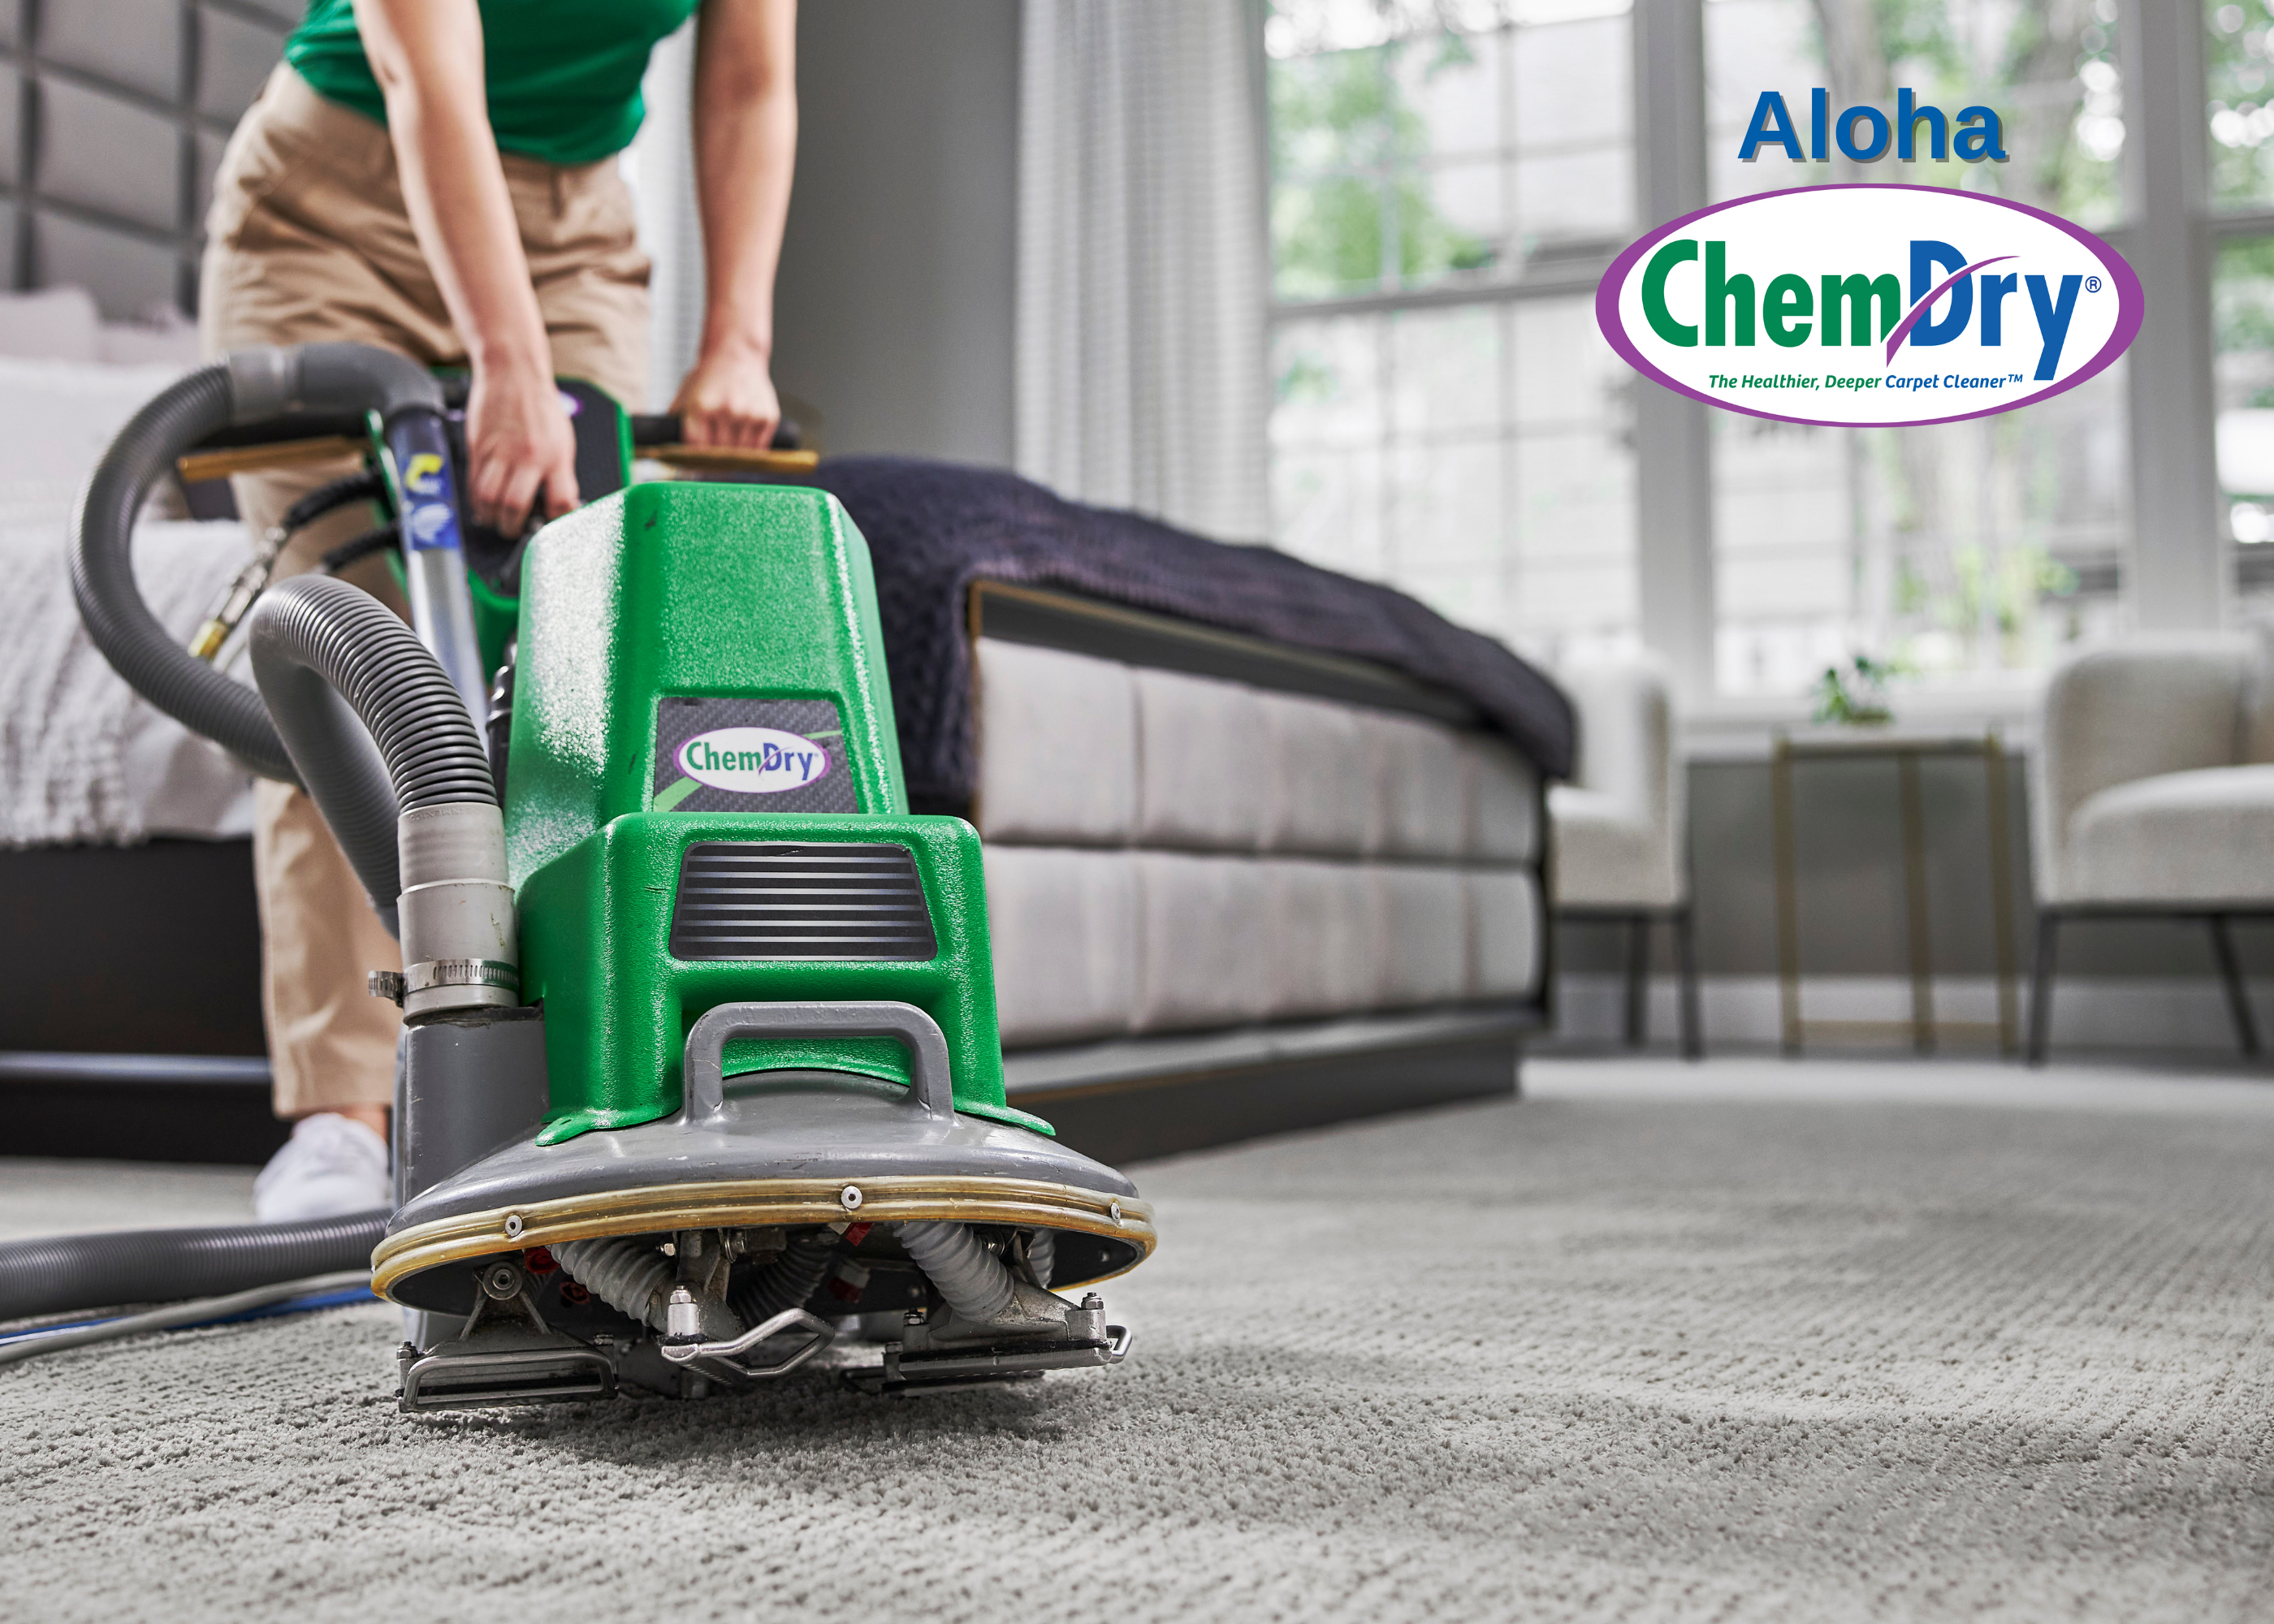 Aloha Chem-Dry is your healthy home provider for carpet and upholstery cleaning